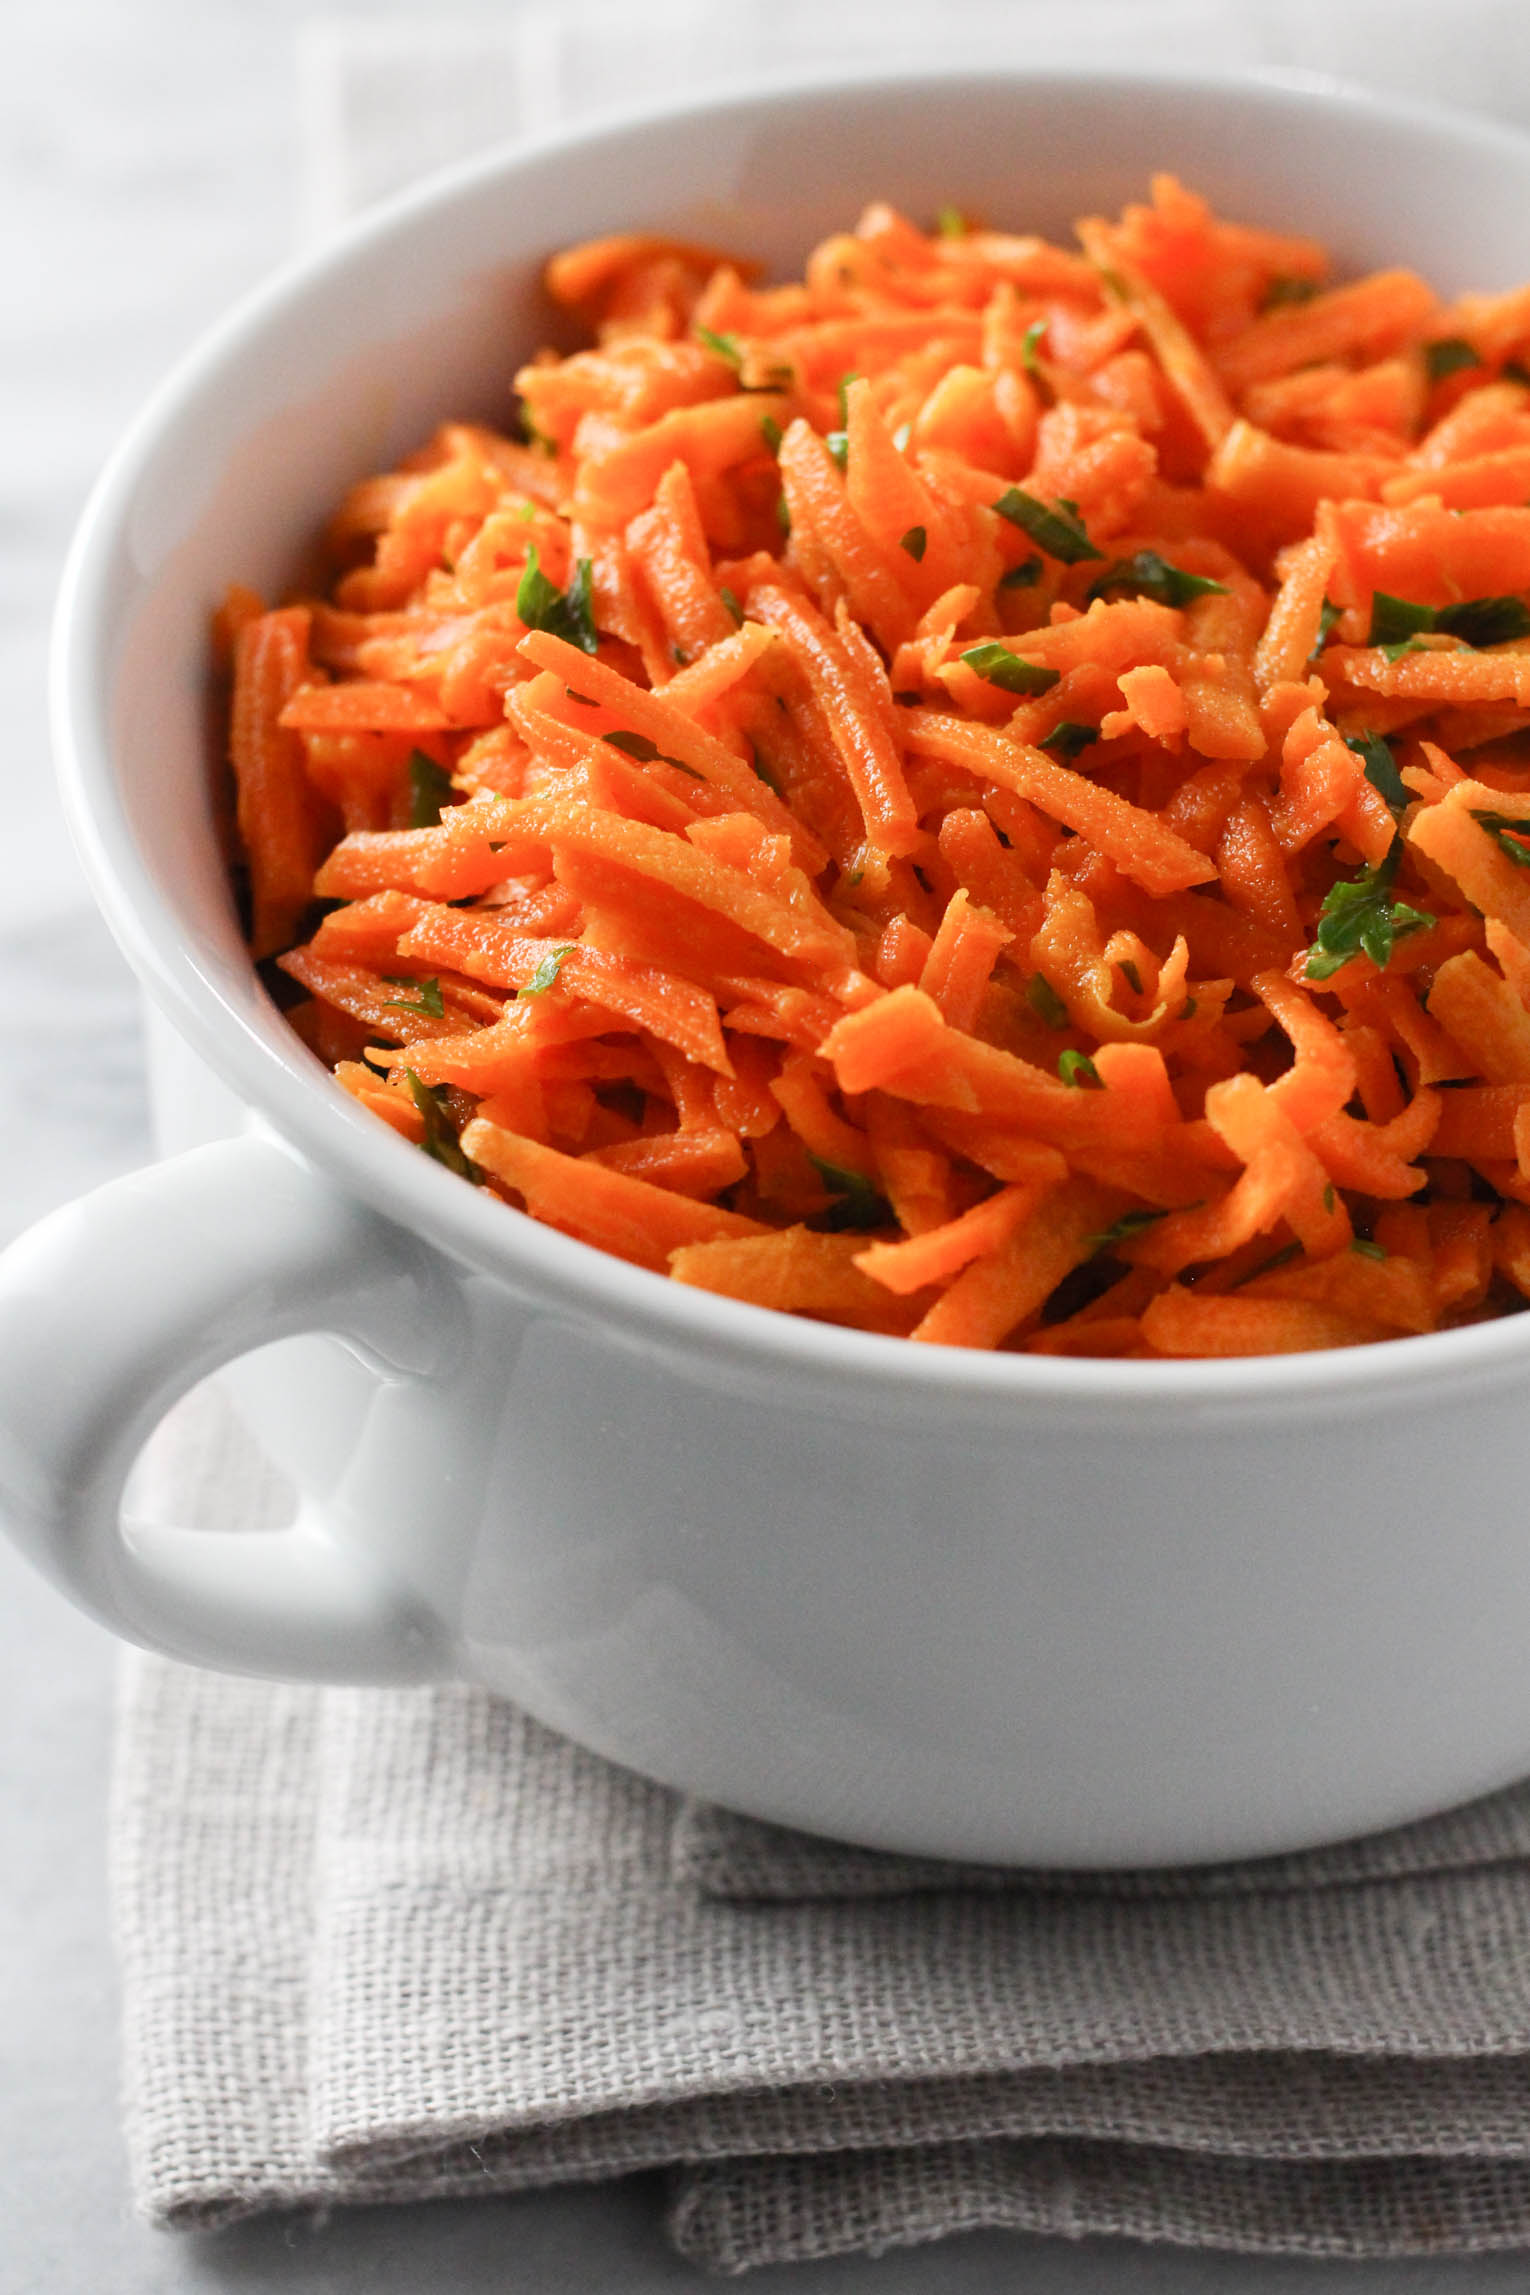 French carrot salad in a white bowl standing on a linen napkin.